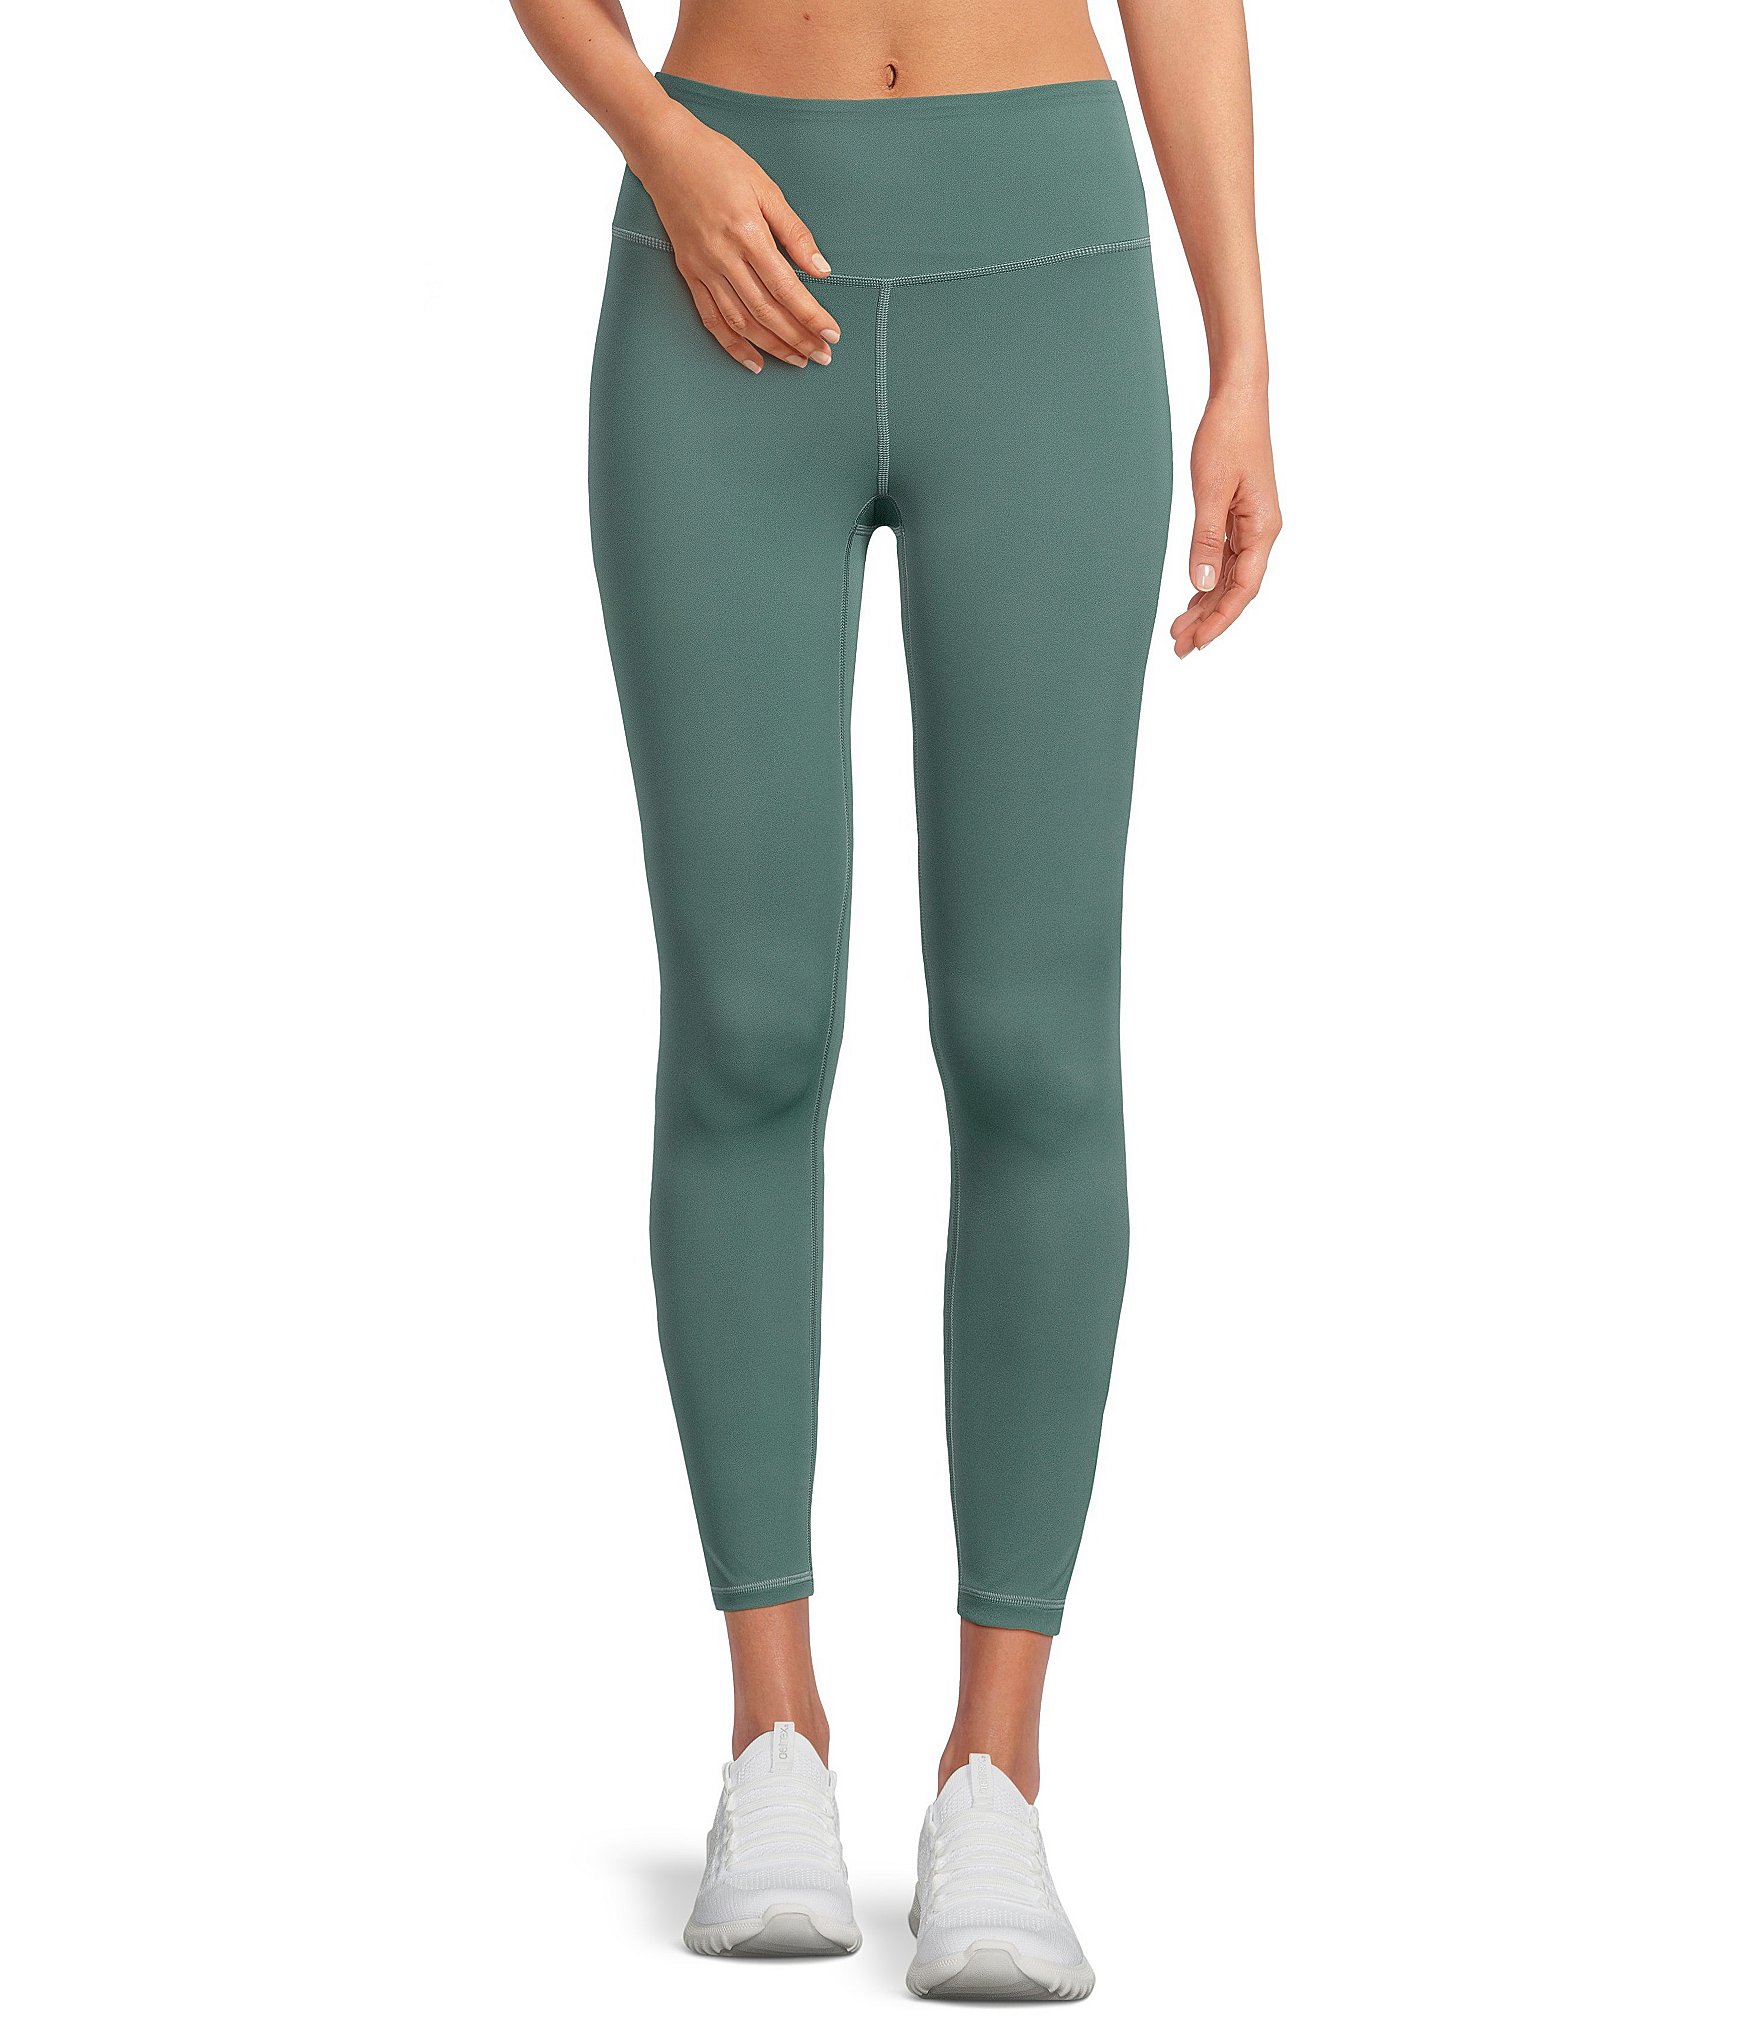 THE NORTH FACE - Women's Easy Fit Resolve Leggings